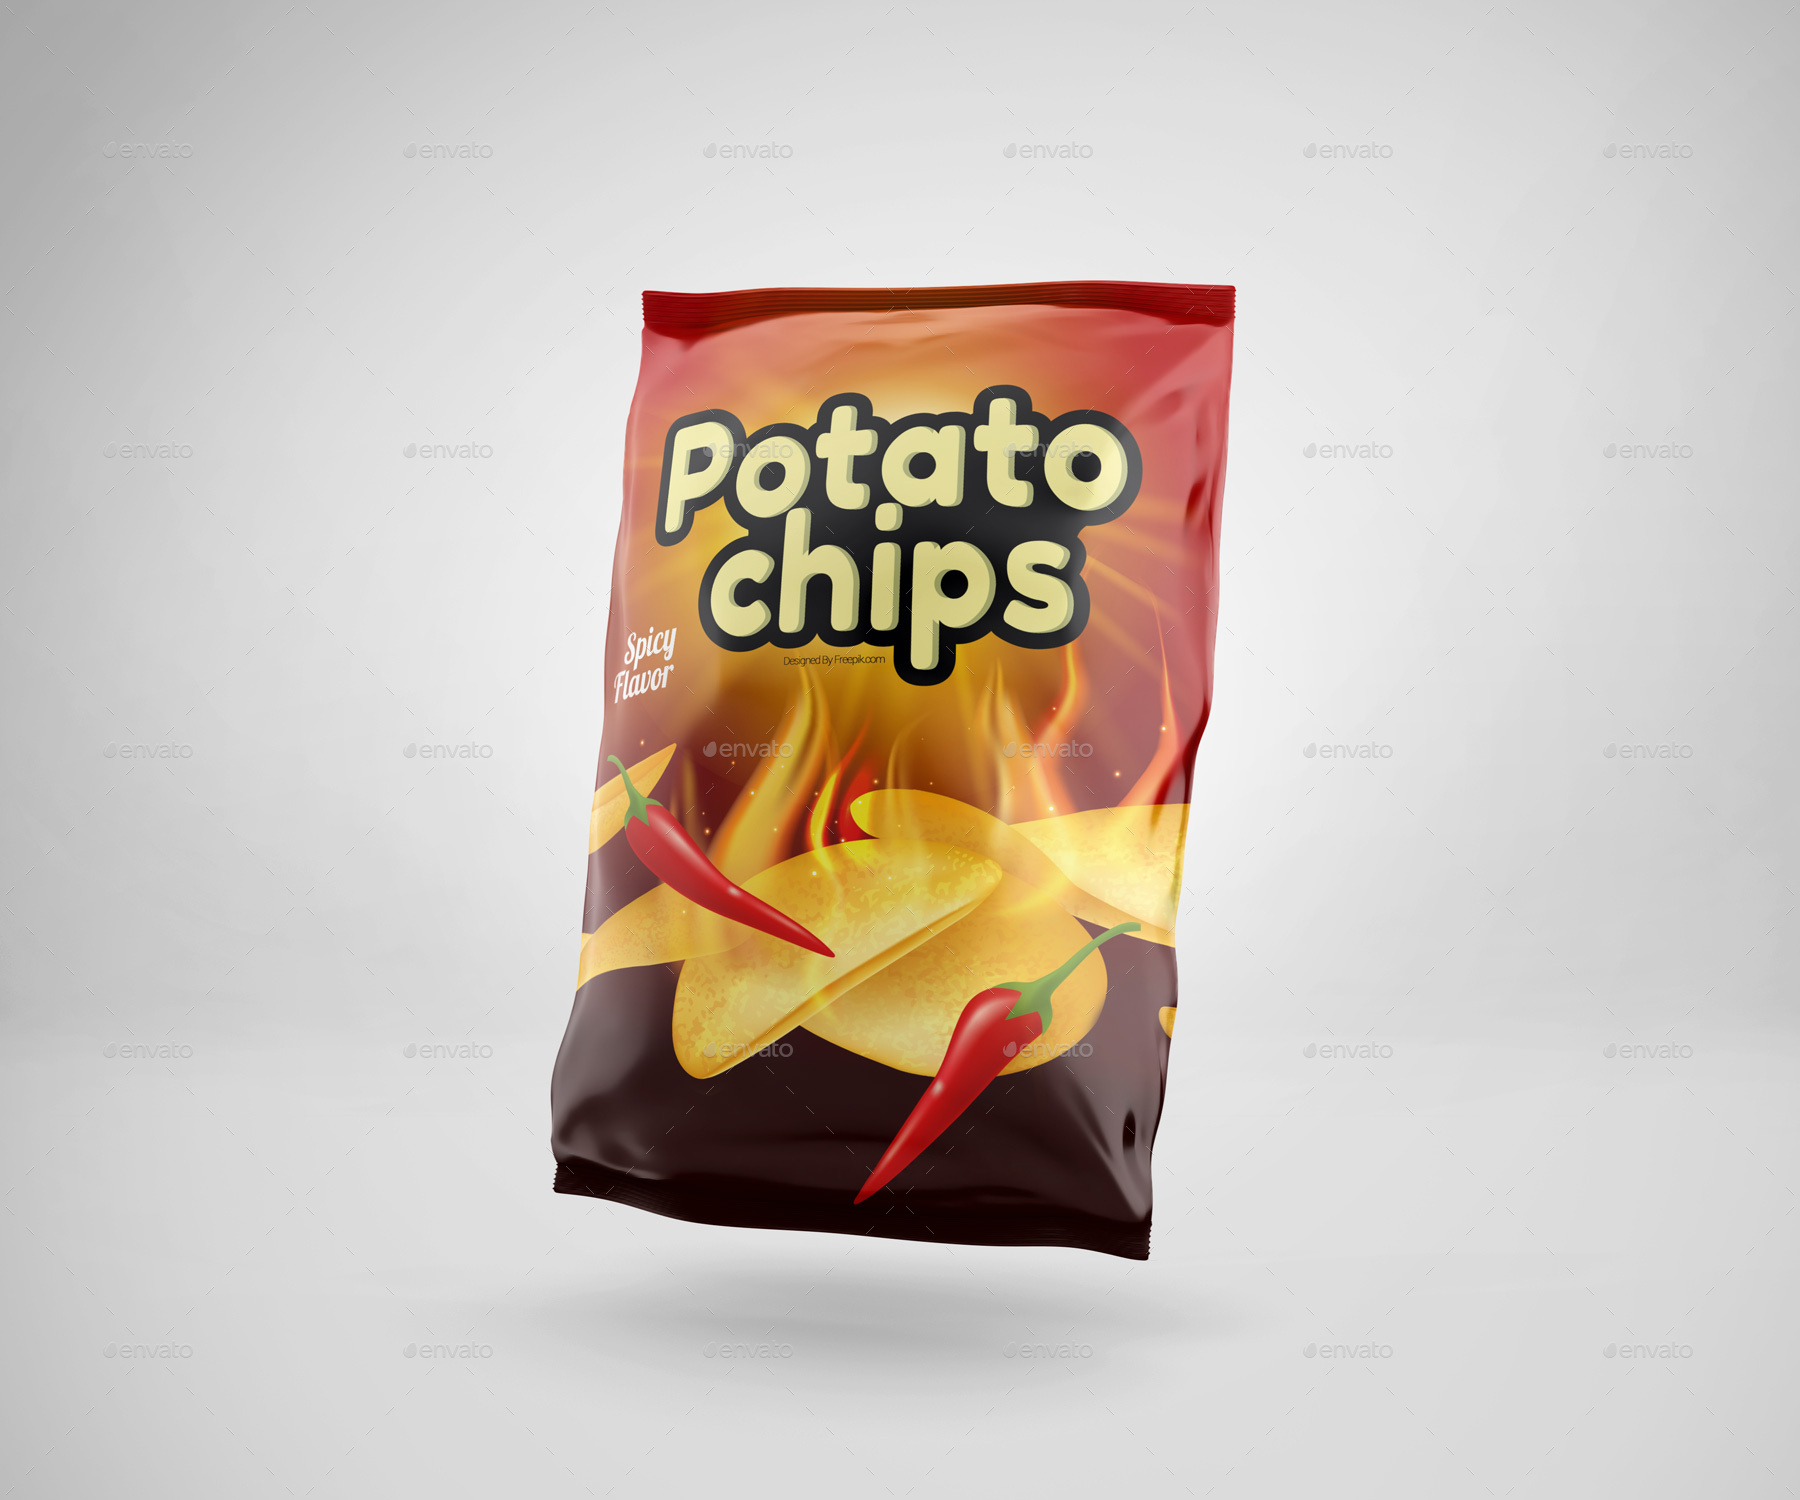 Download Snack Bag Mockup by Pixelica21 | GraphicRiver